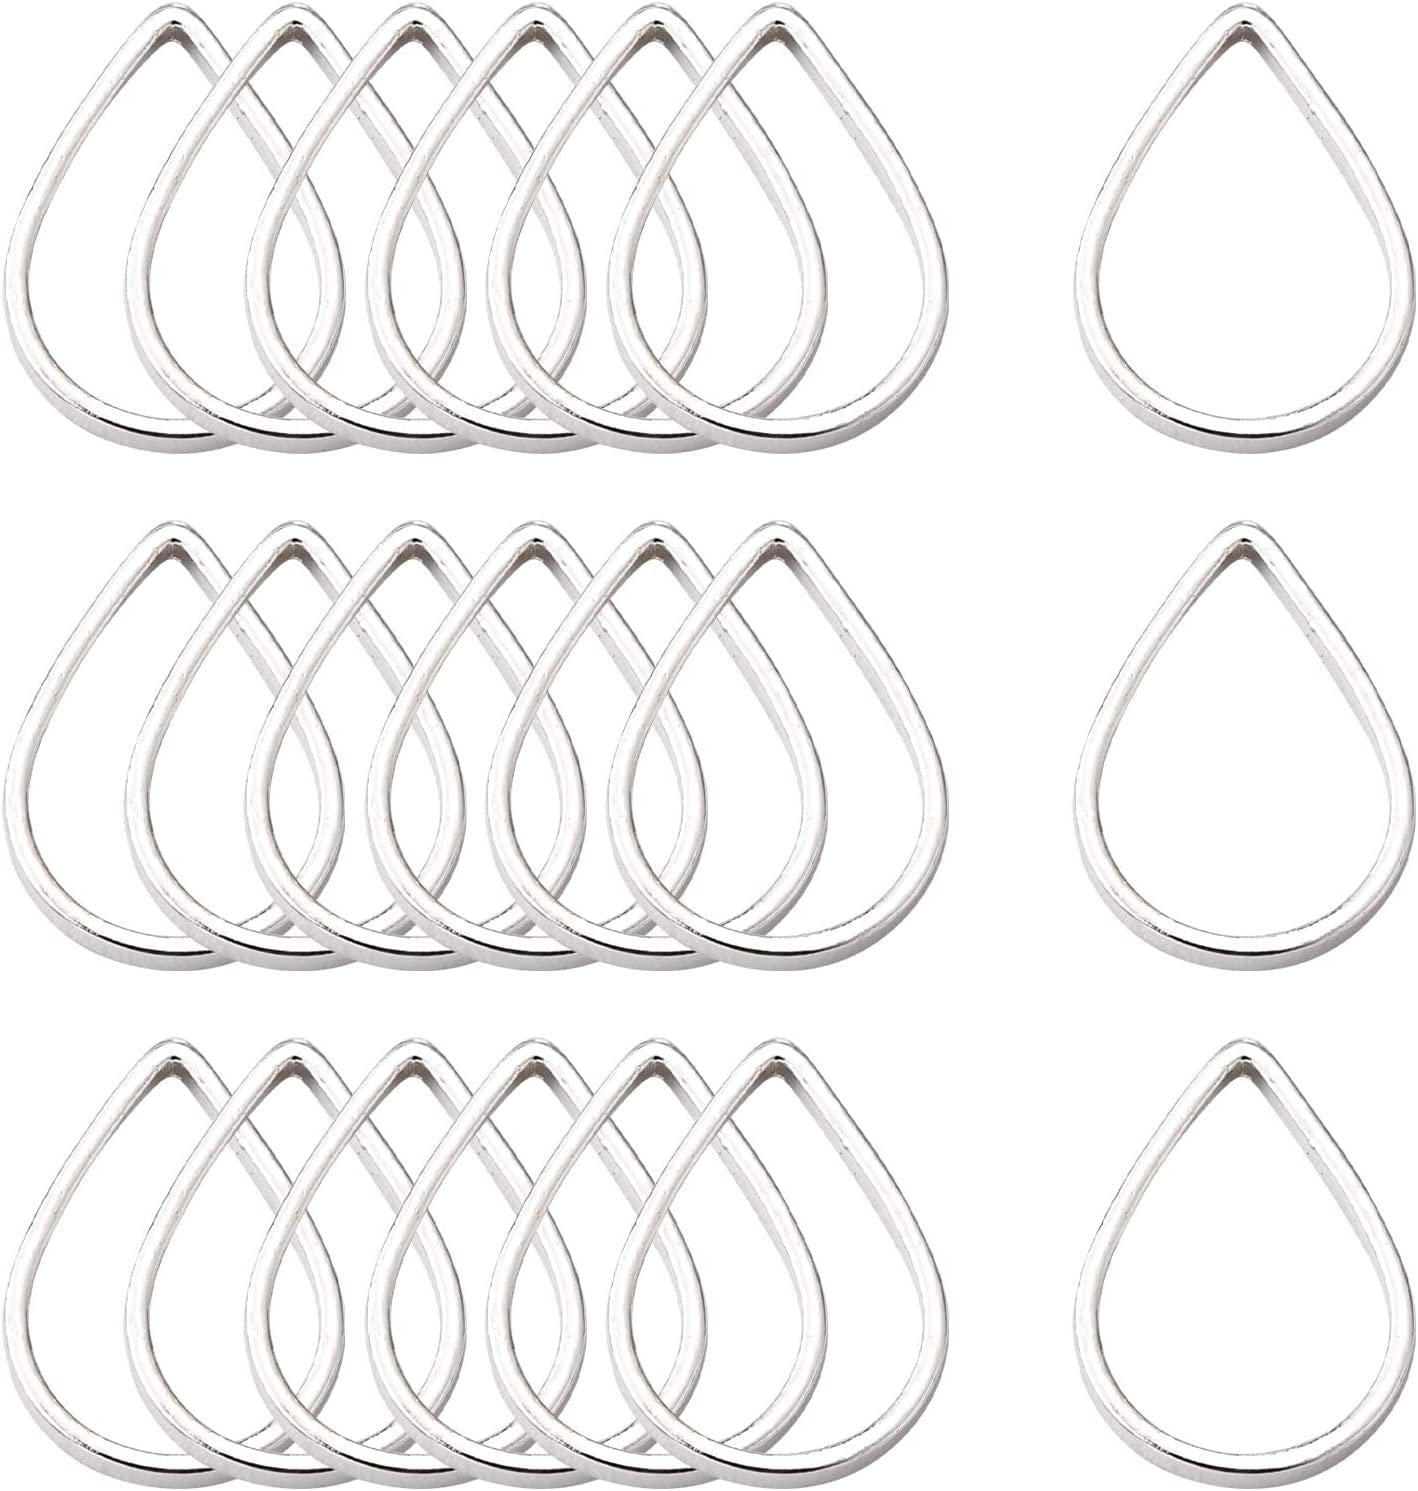 FASHEWELRY, FASHEWELRY 100Pcs Brass Teardrop Open Bezel Charms Connectors Silver Hollow Linking Rings Charms for Dangle Beading Hoop Jewelry Making, 11x7x1mm